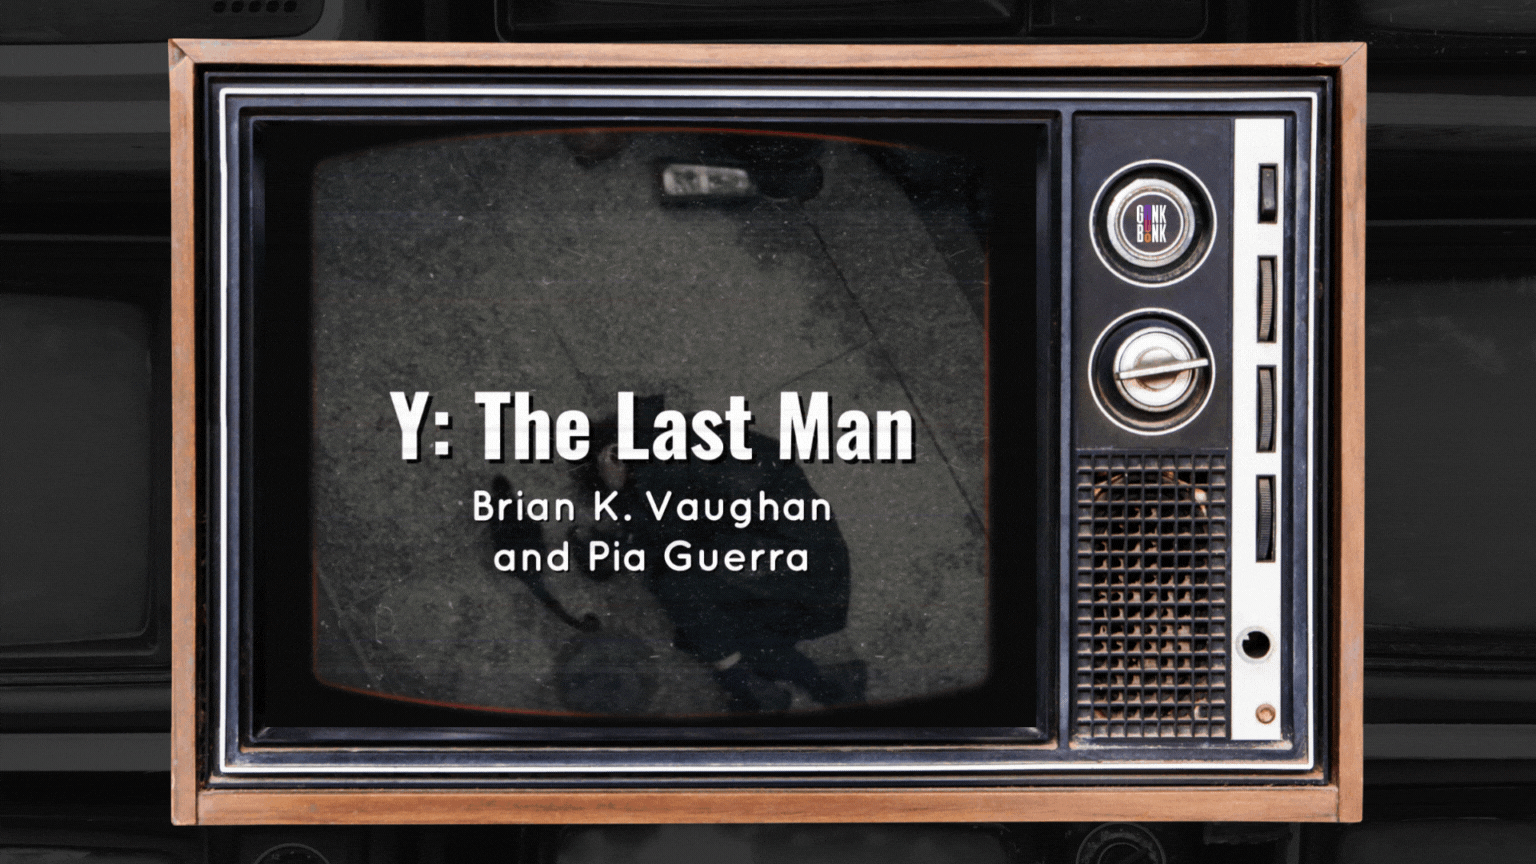 Y: The Last Man TV Show and Comics